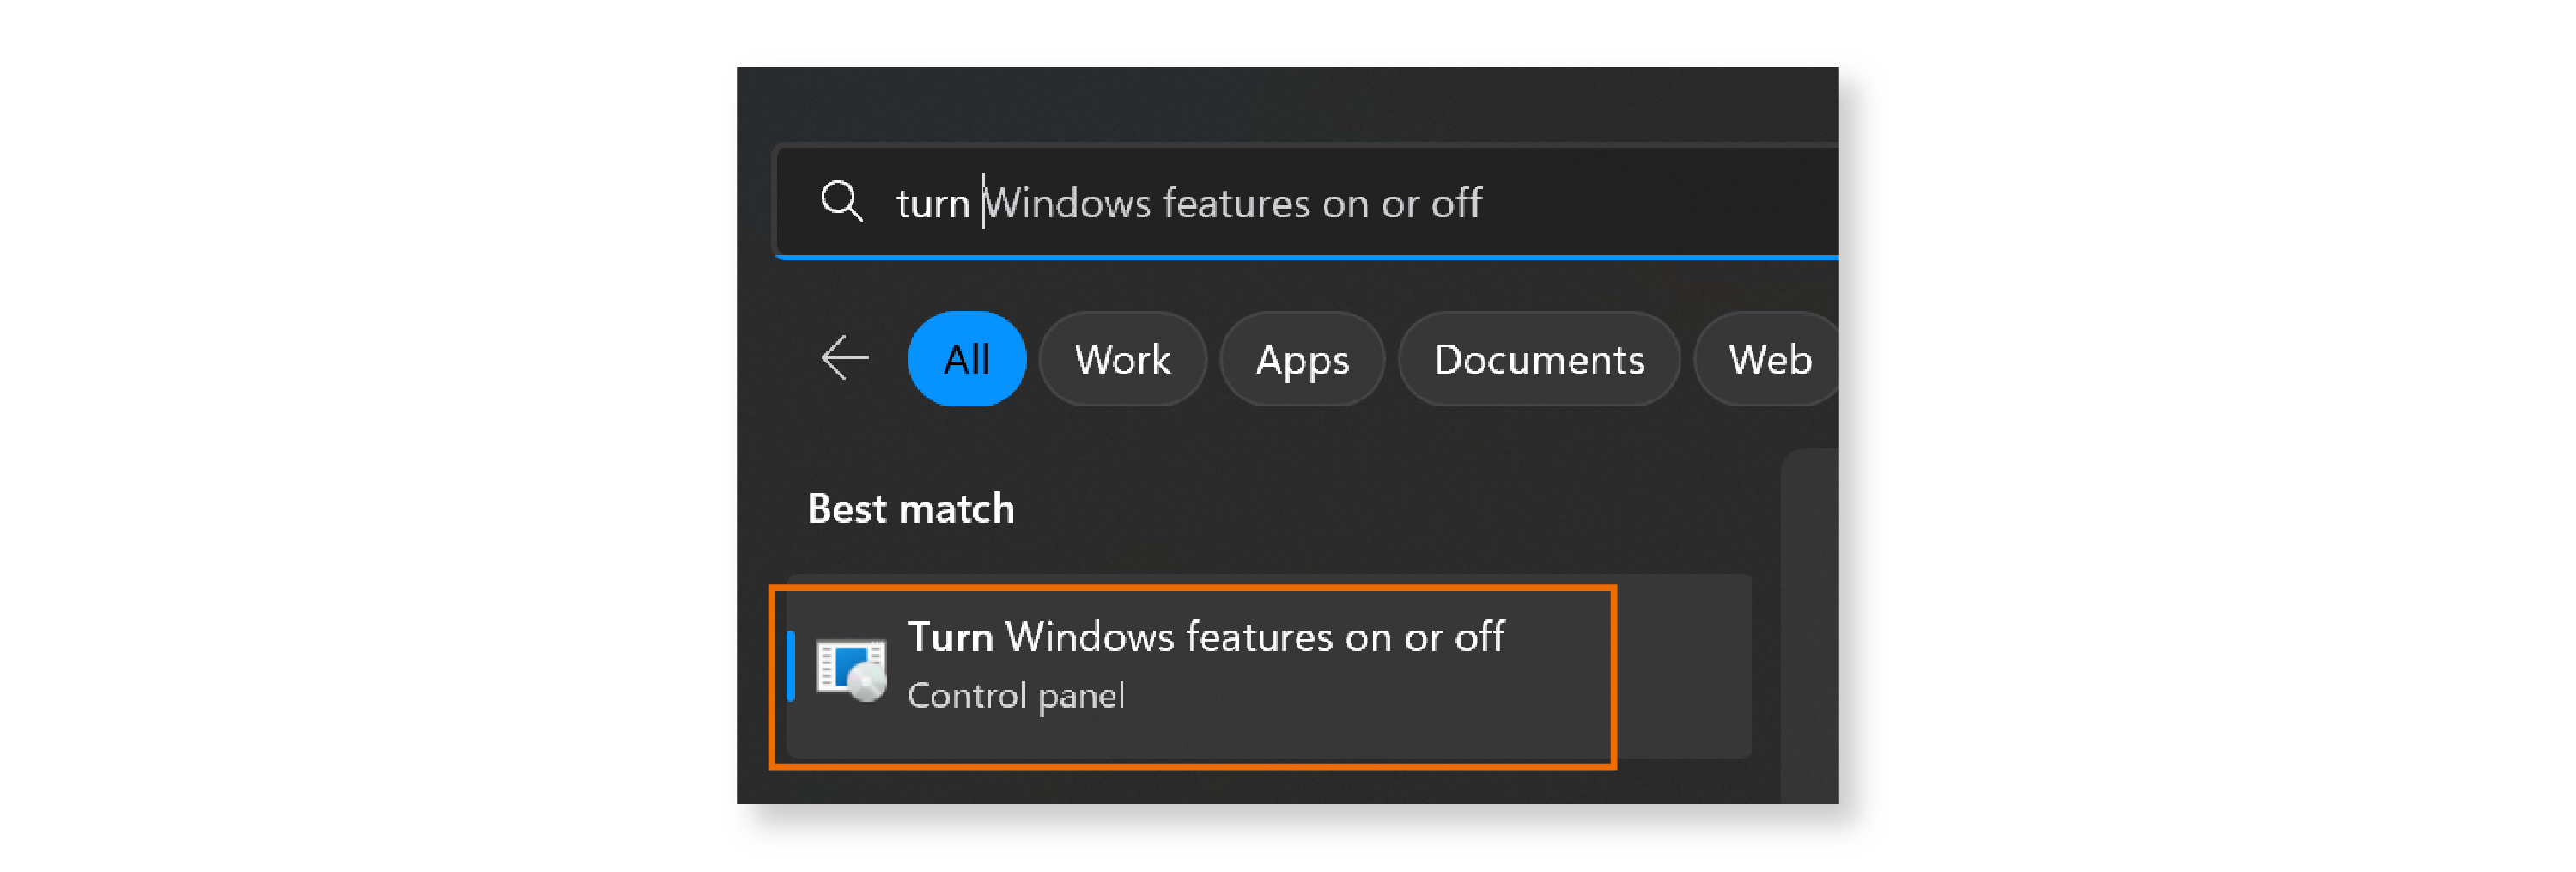 Screenshot of searching for "Turn Windows featurs on or off".